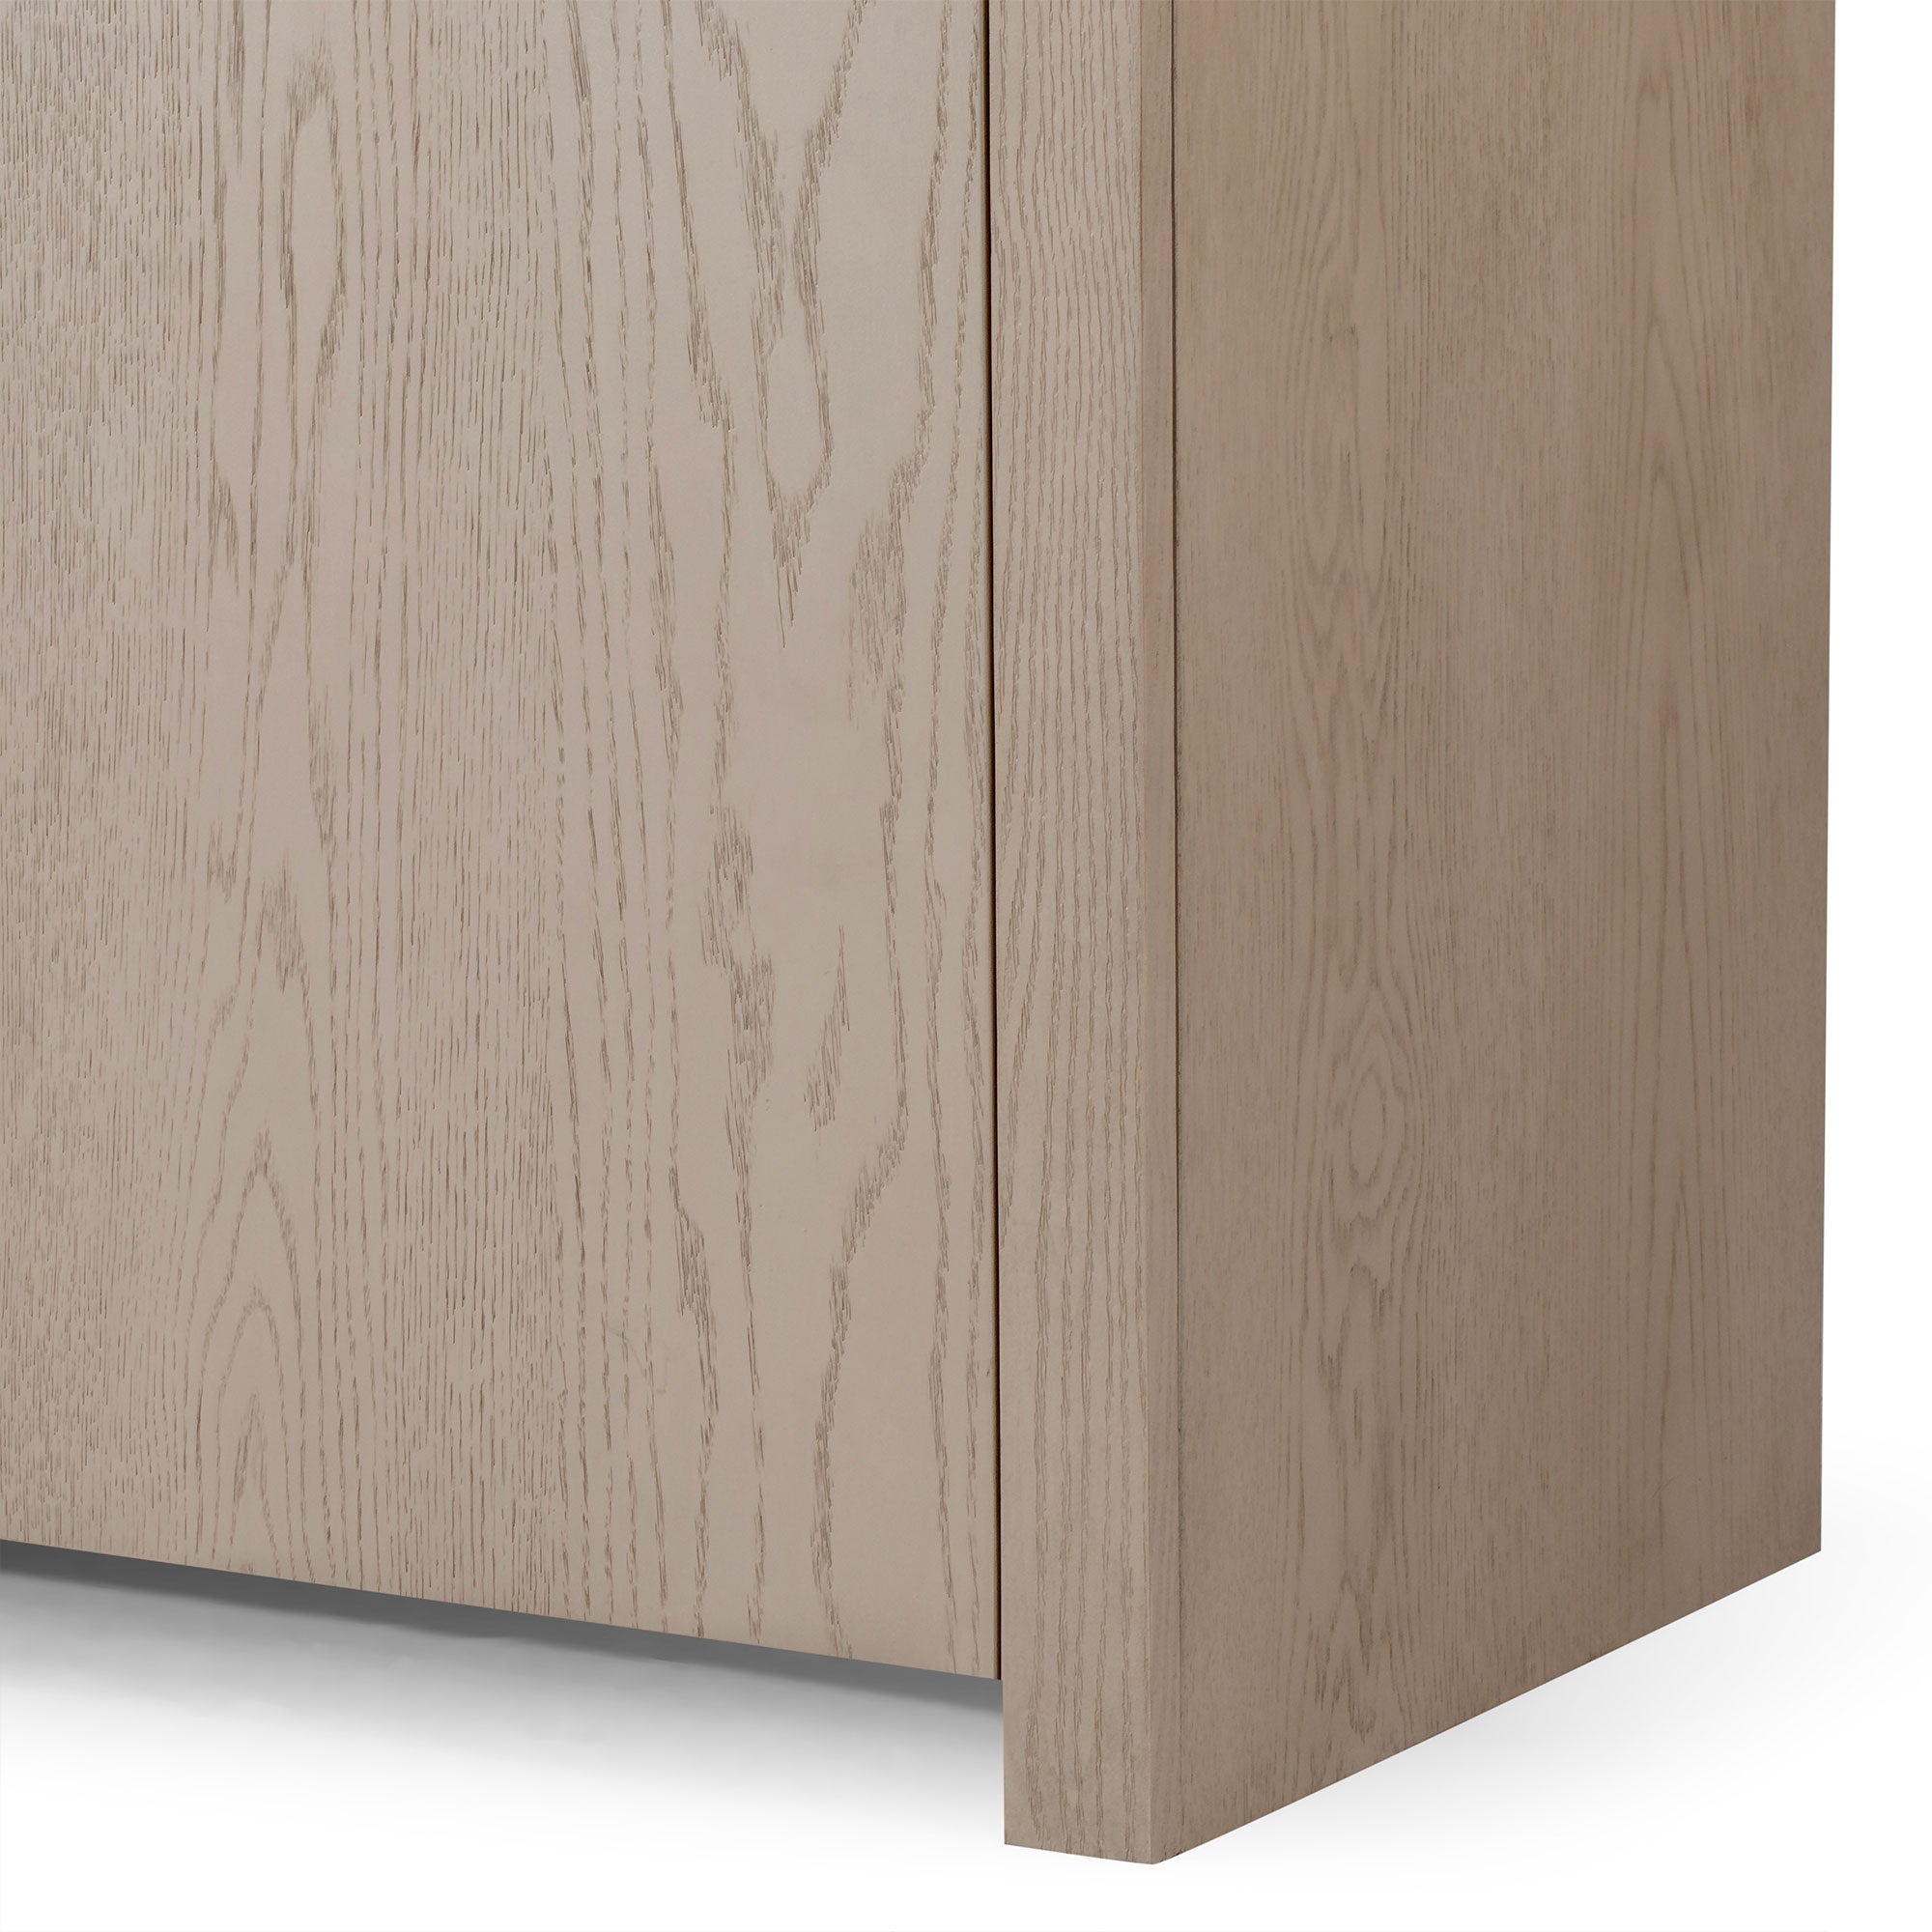 Iris Contemporary Wooden Sideboard in Refined White Finish in Cabinets by Maven Lane